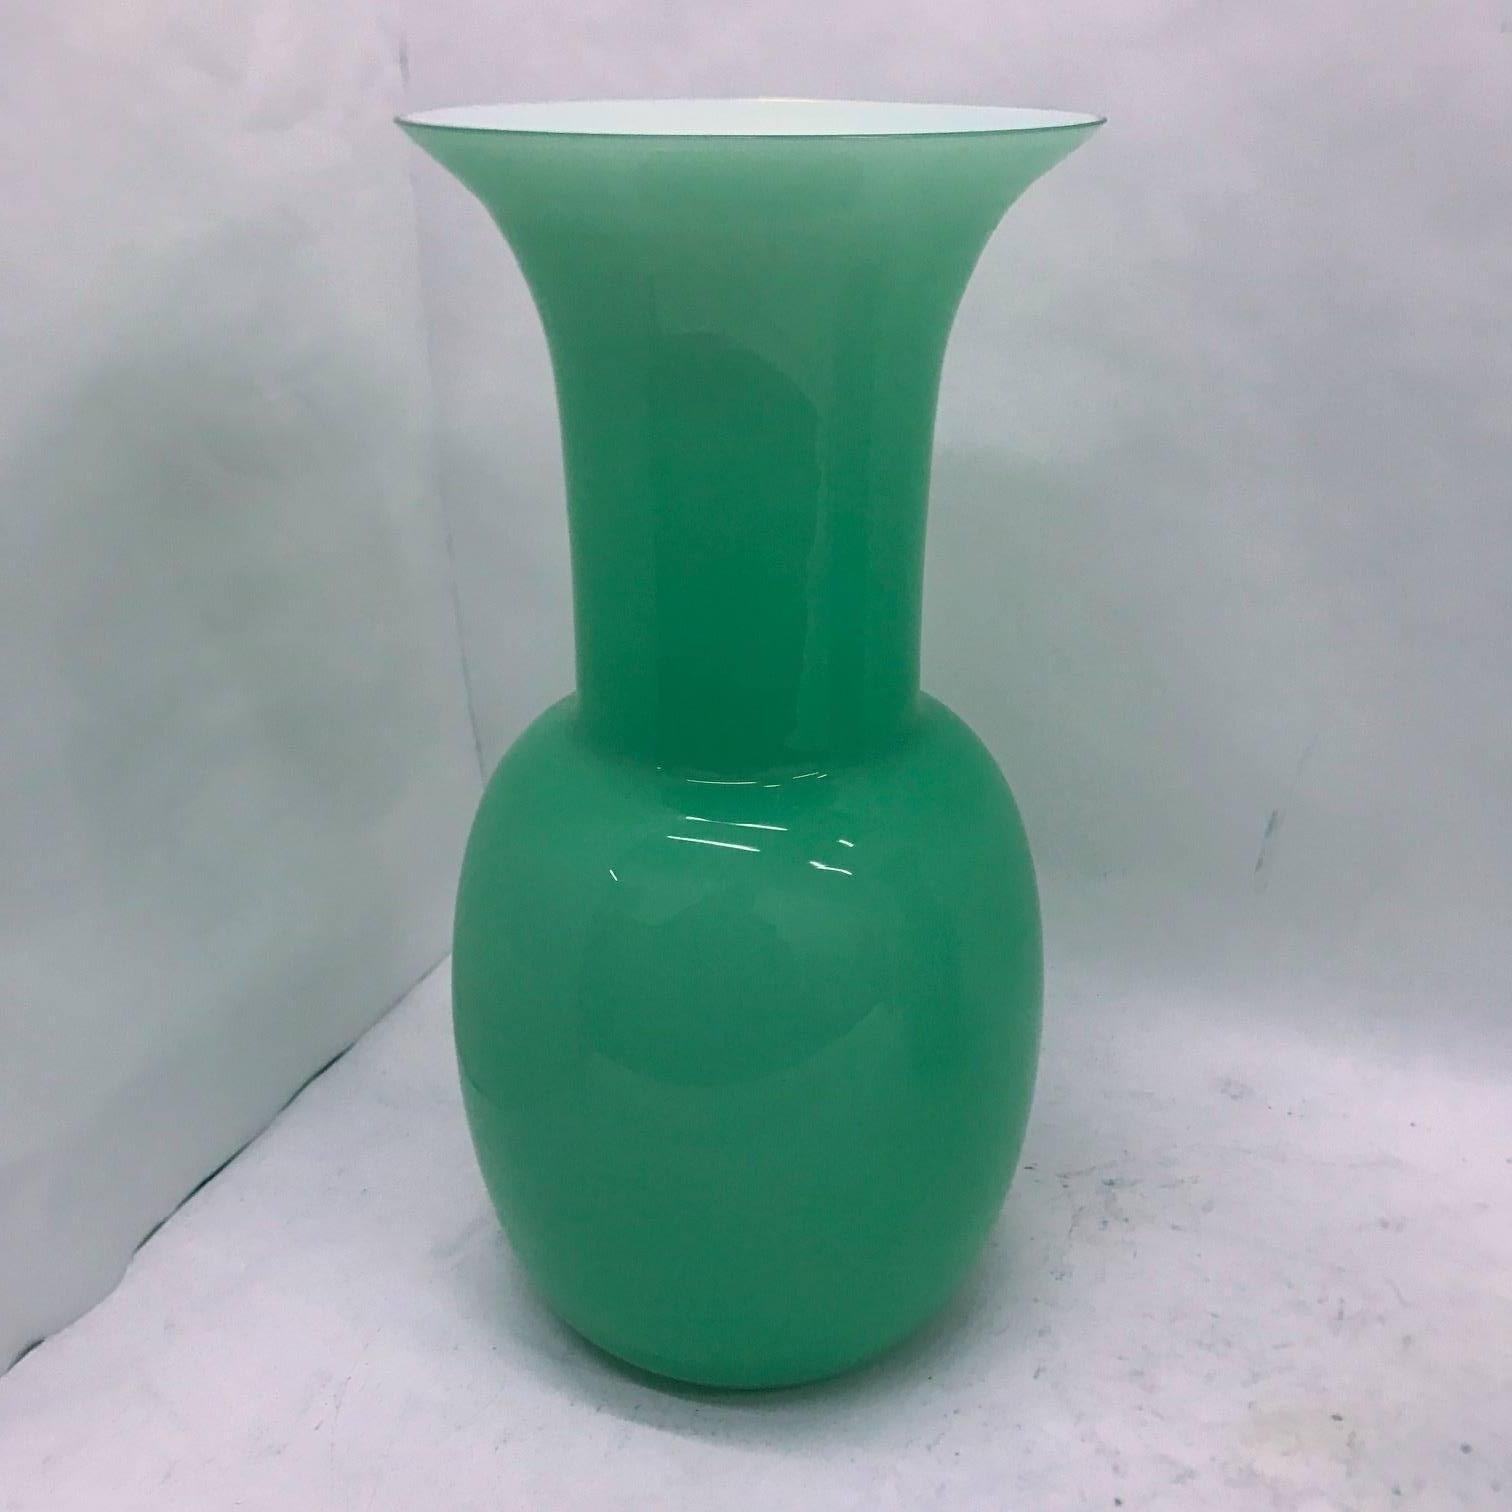 Pair of Murano glass vases signed by Aureliano Toso, made in 2001, green color and white inside, good conditions overall.